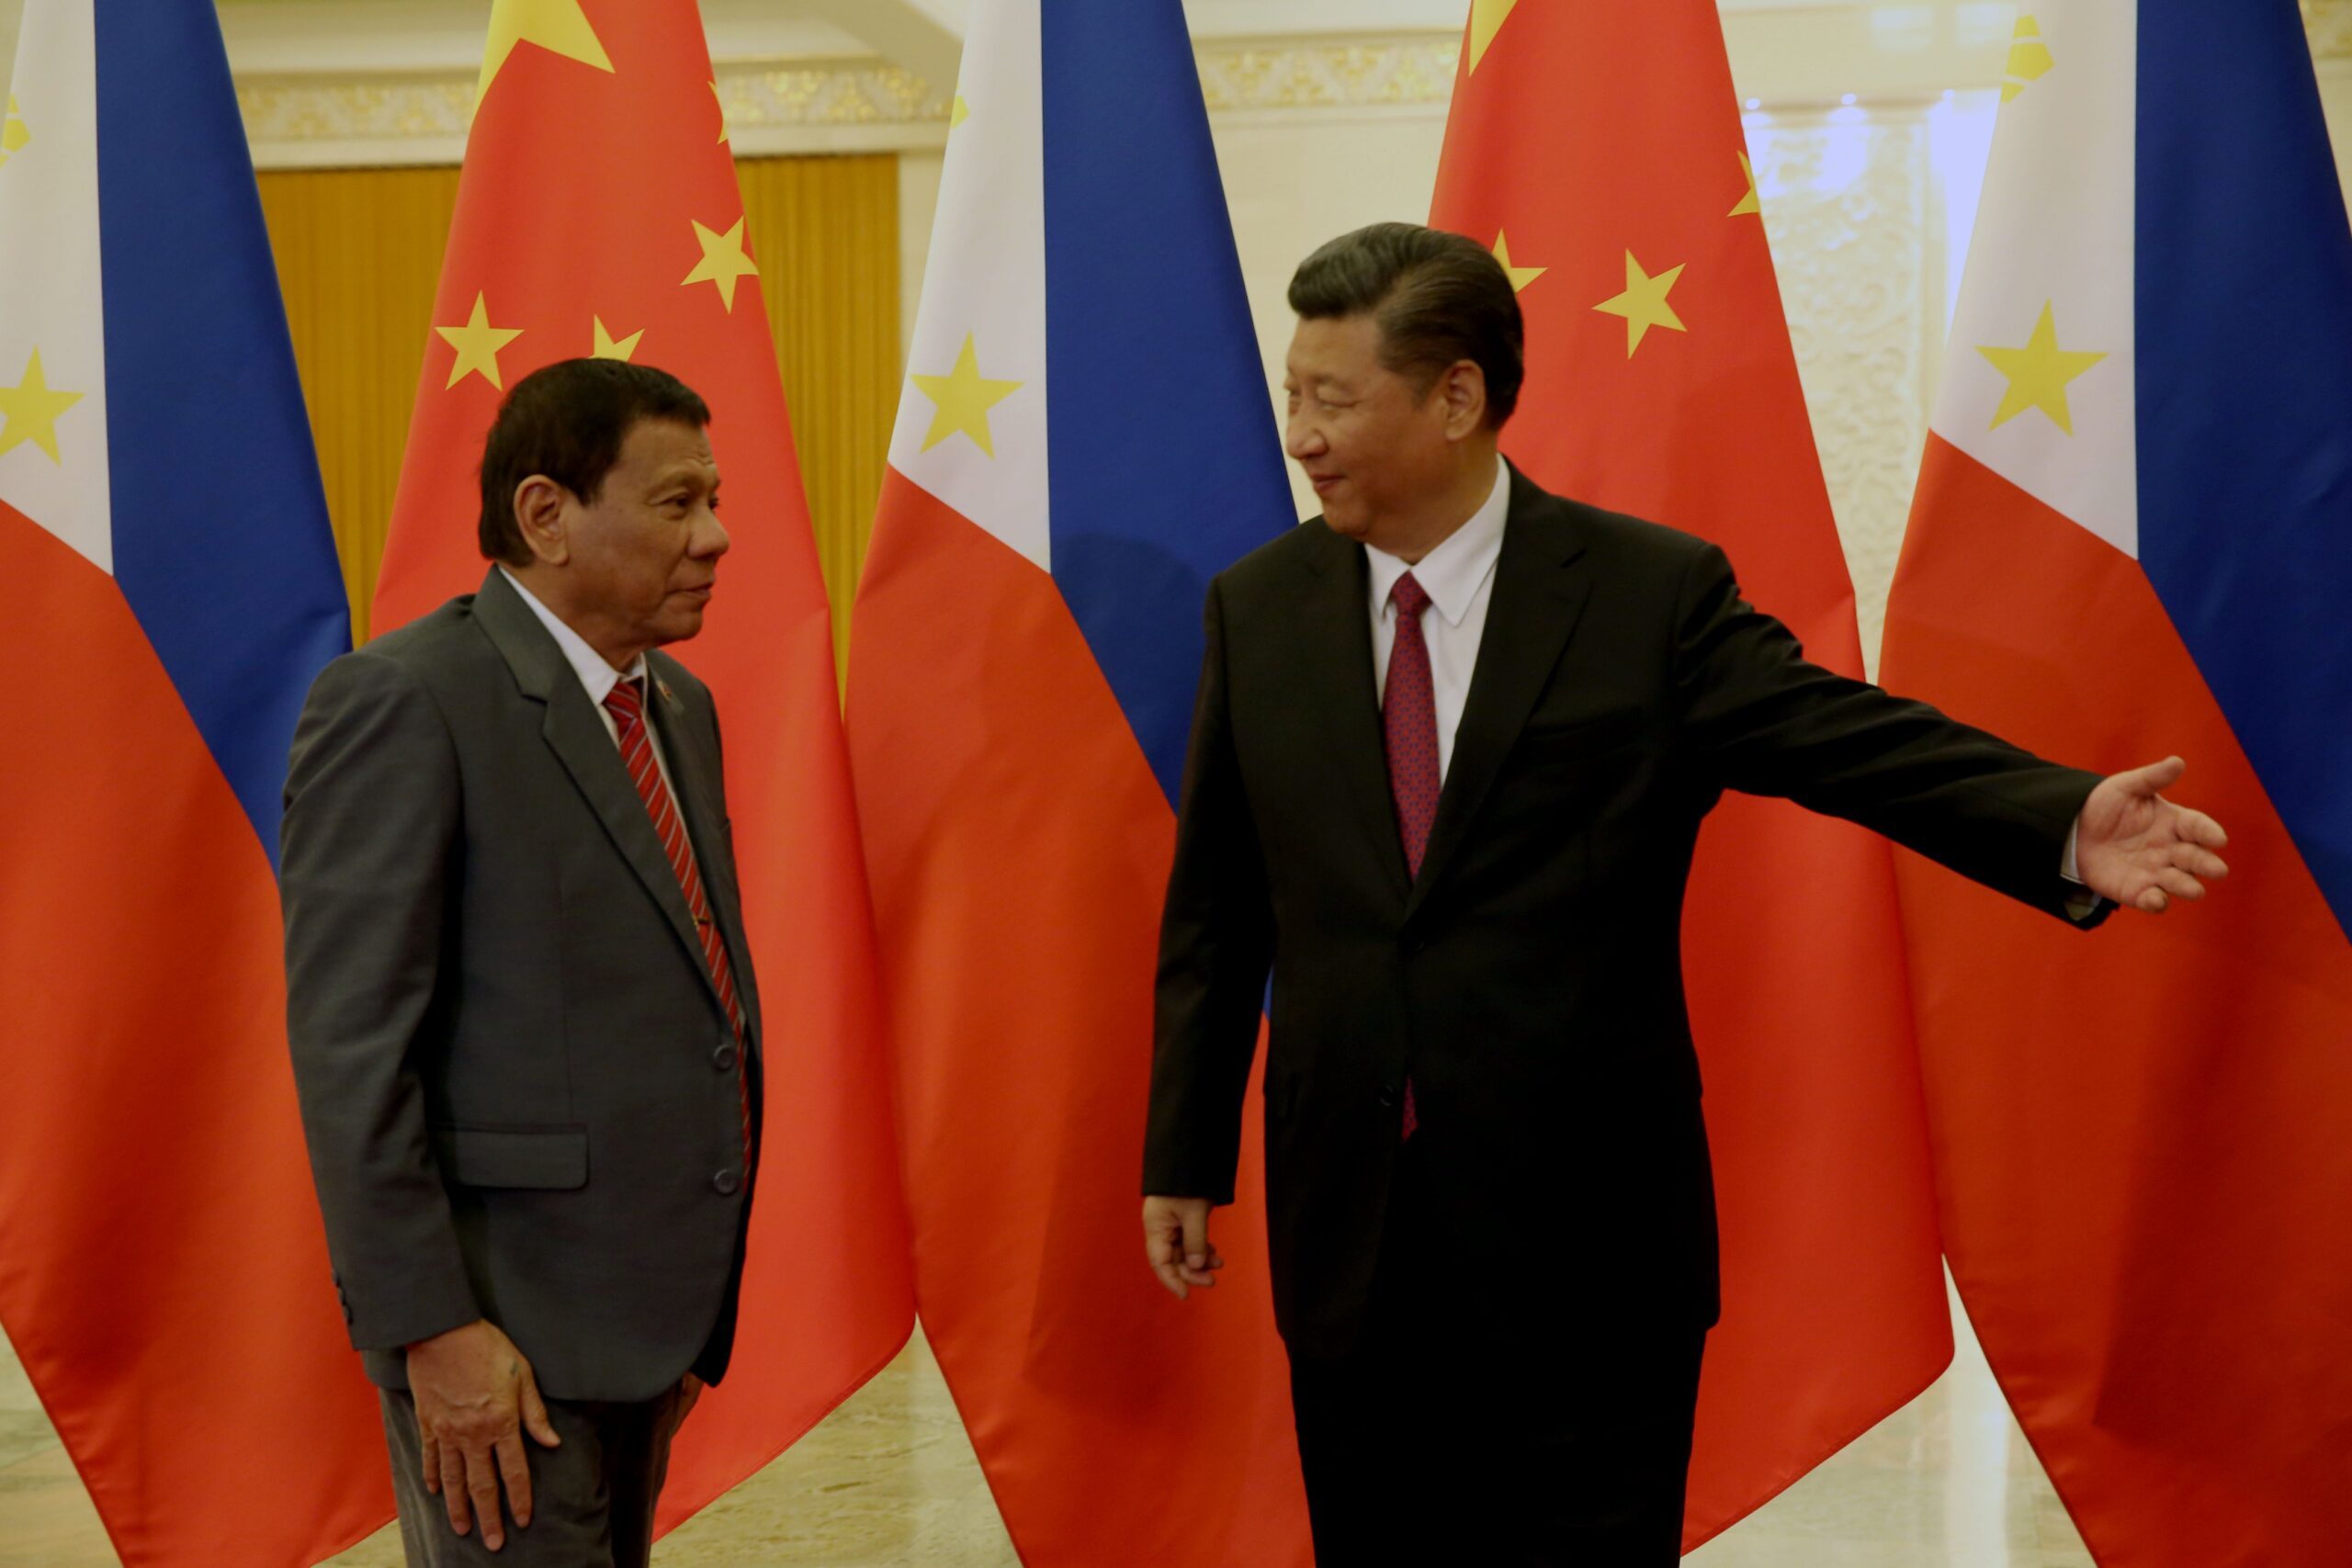 Duterte to ask China to clarify plans in West PH Sea